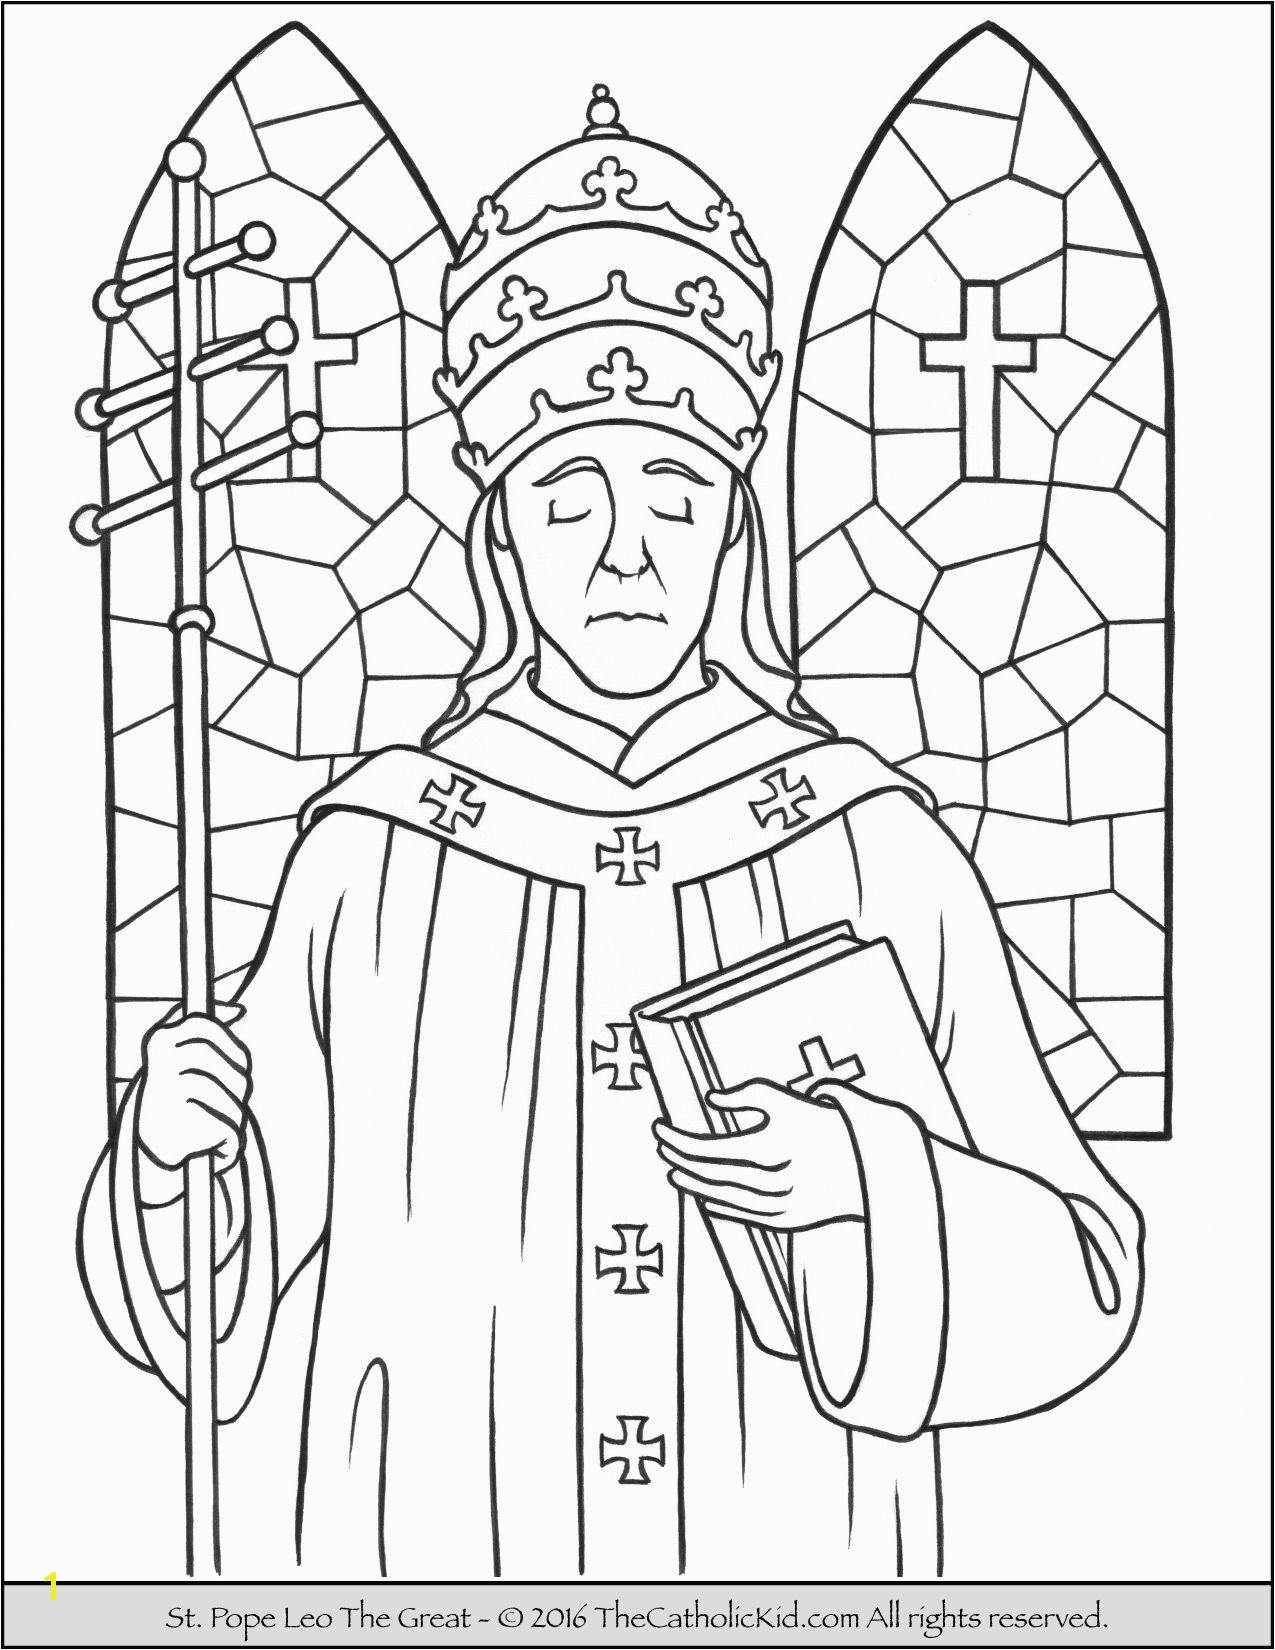 Saint Pope Leo the Great Coloring Page The Catholic Kid